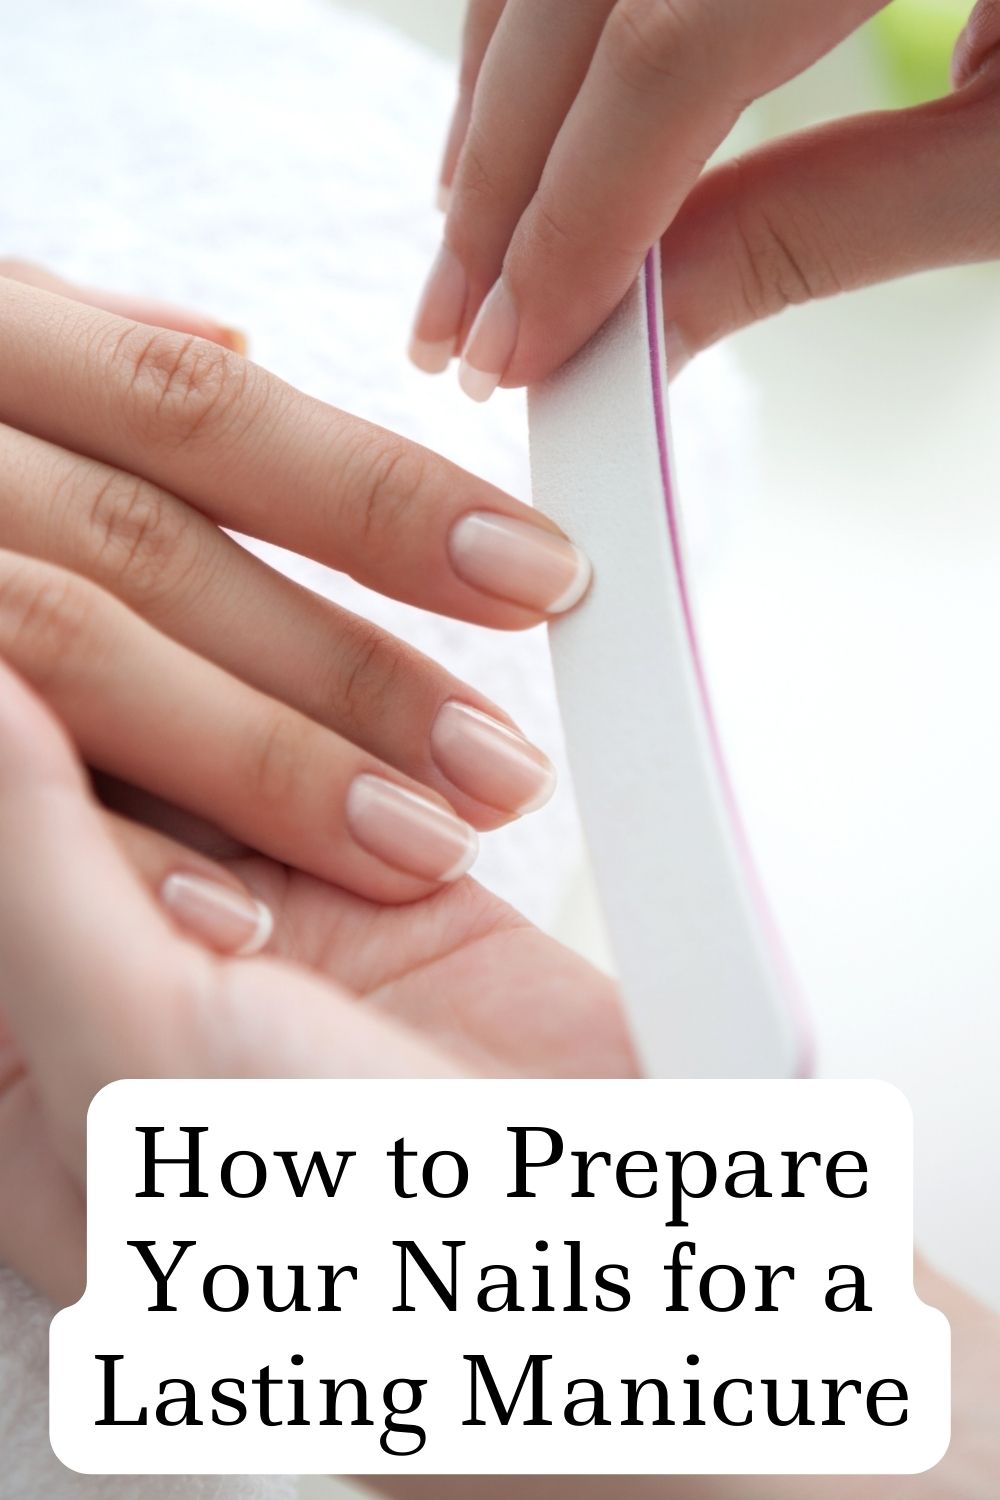 How to Prepare Your Nails for a Lasting Manicure